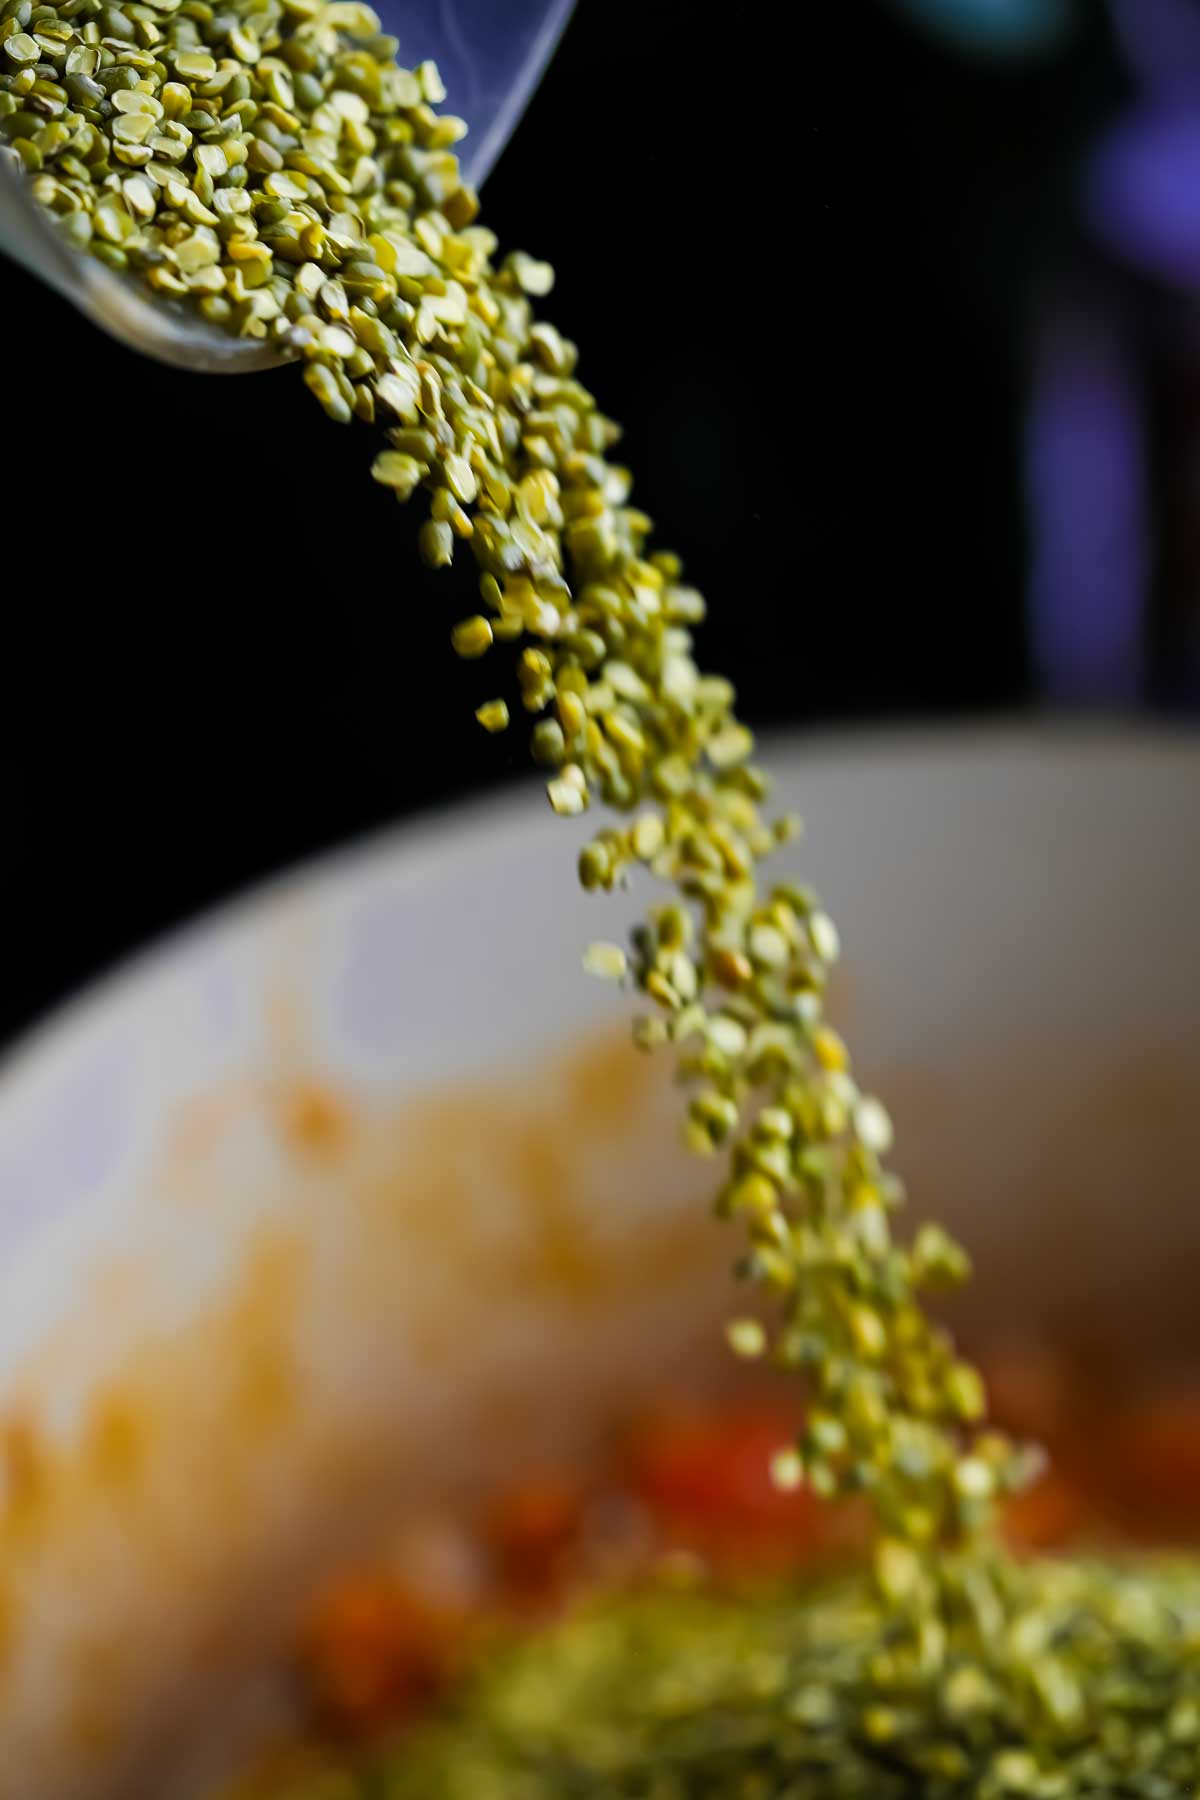 Split green mung beans being poured into a pot.